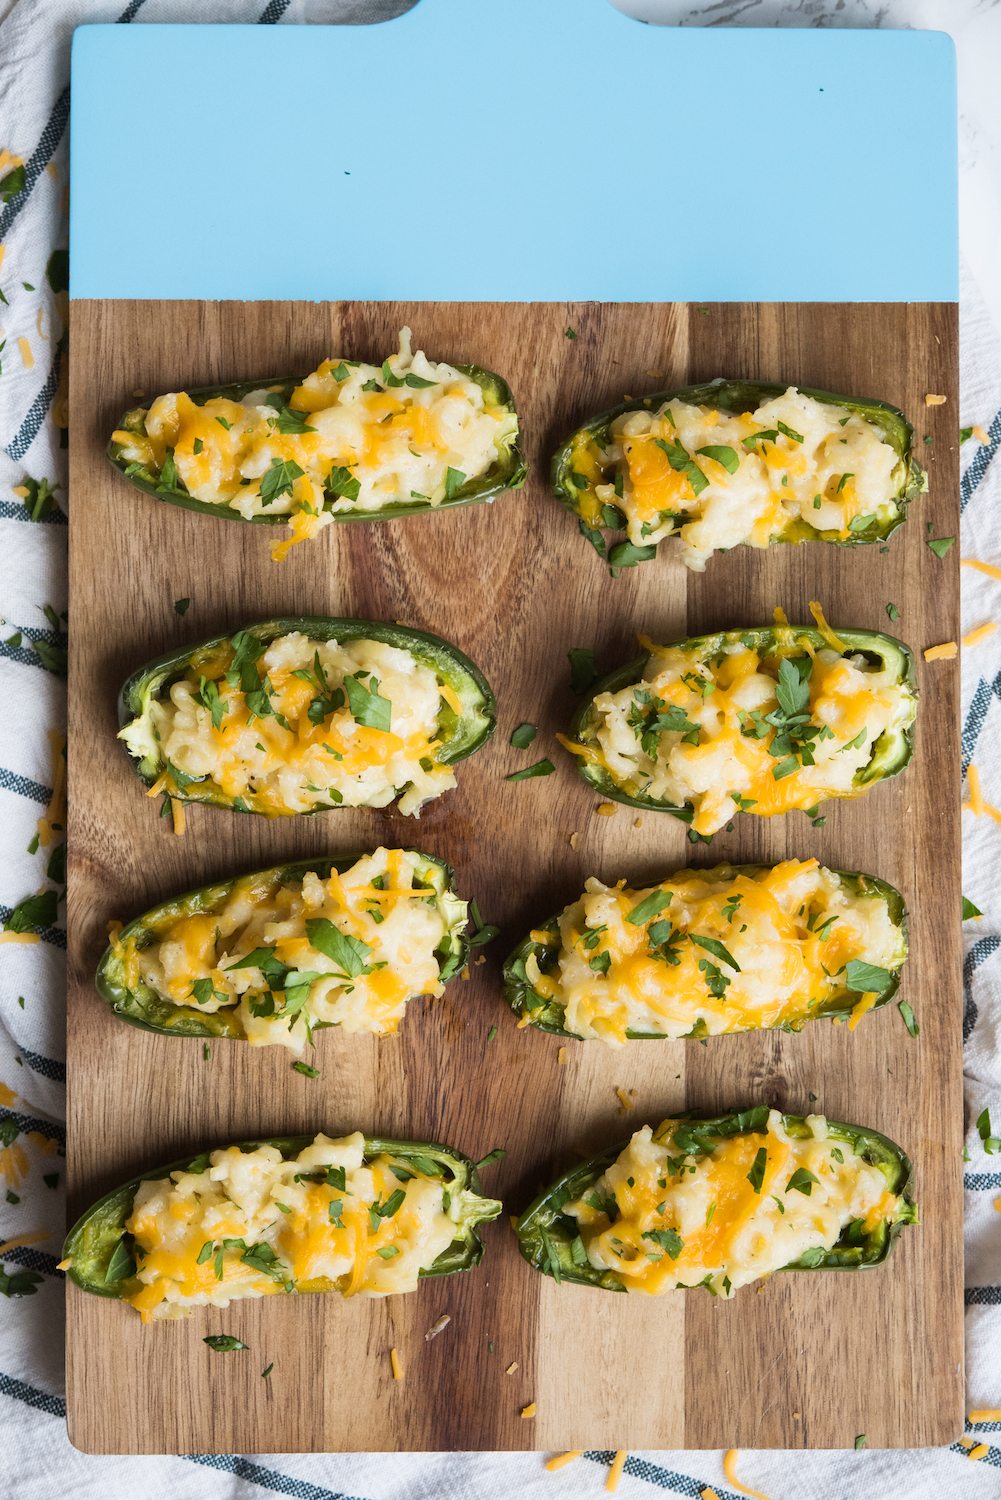 Mac + Cheese Stuffed Jalapeño Poppers | Party appetizers, entertaining tips, party ideas, home decor, cocktail recipes and more from @cydconverse